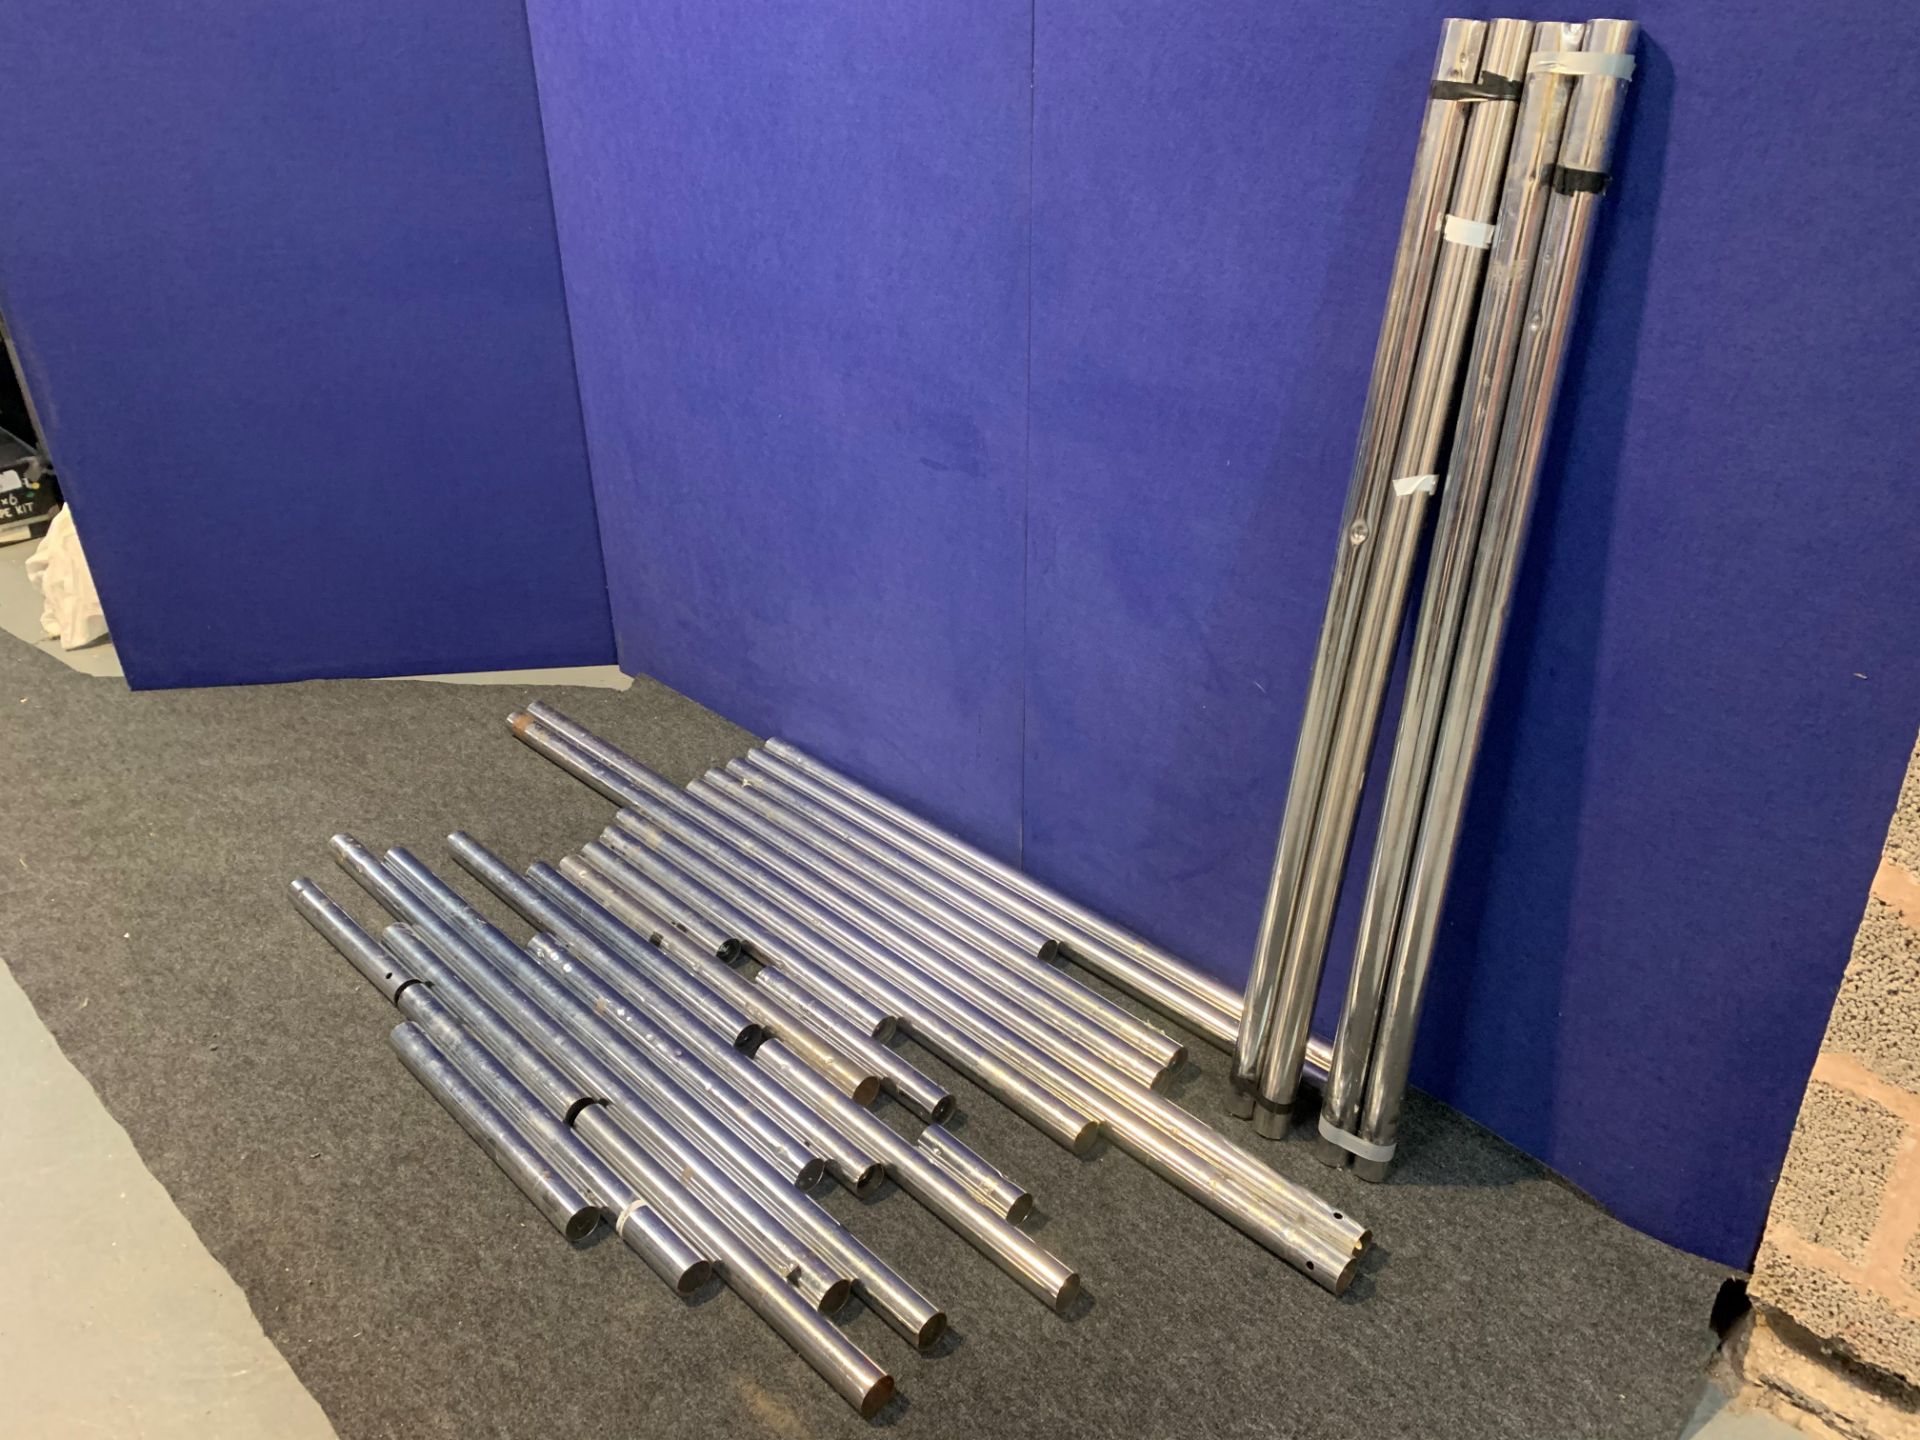 29 Chrome Poles - Various Lengths from 170-2000mm